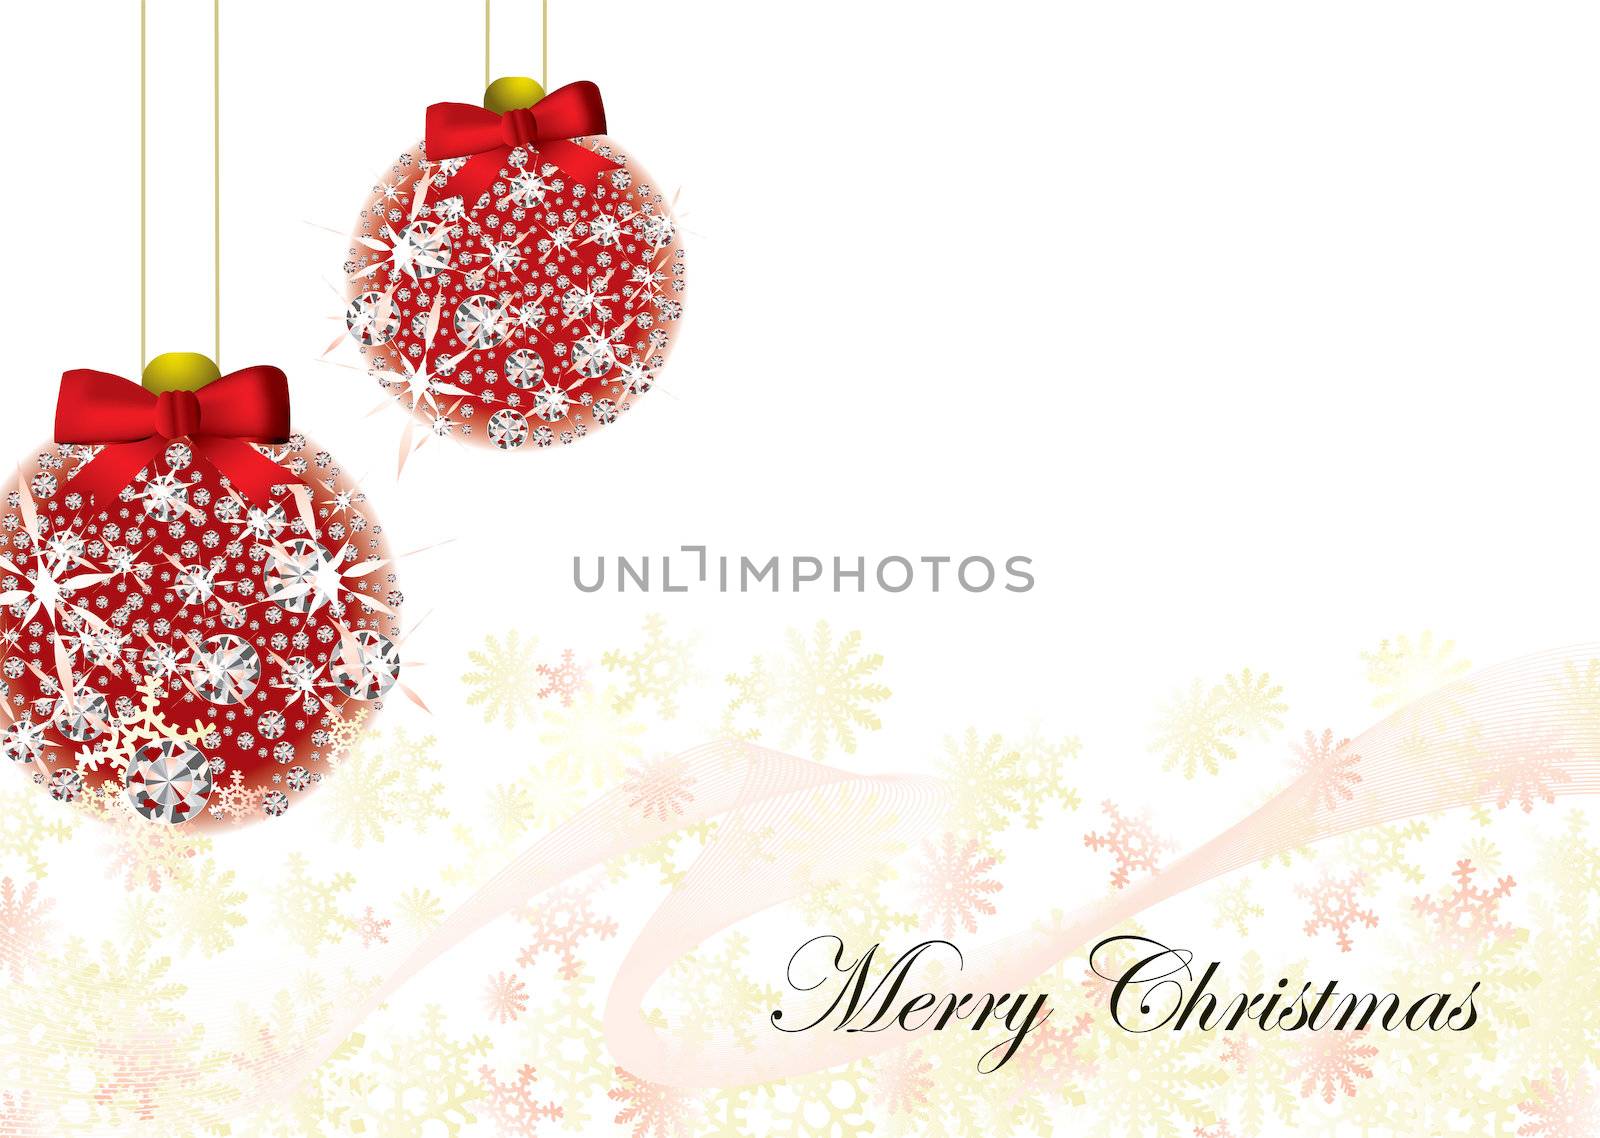 Christmas inspired background image with snow flakes and baubles